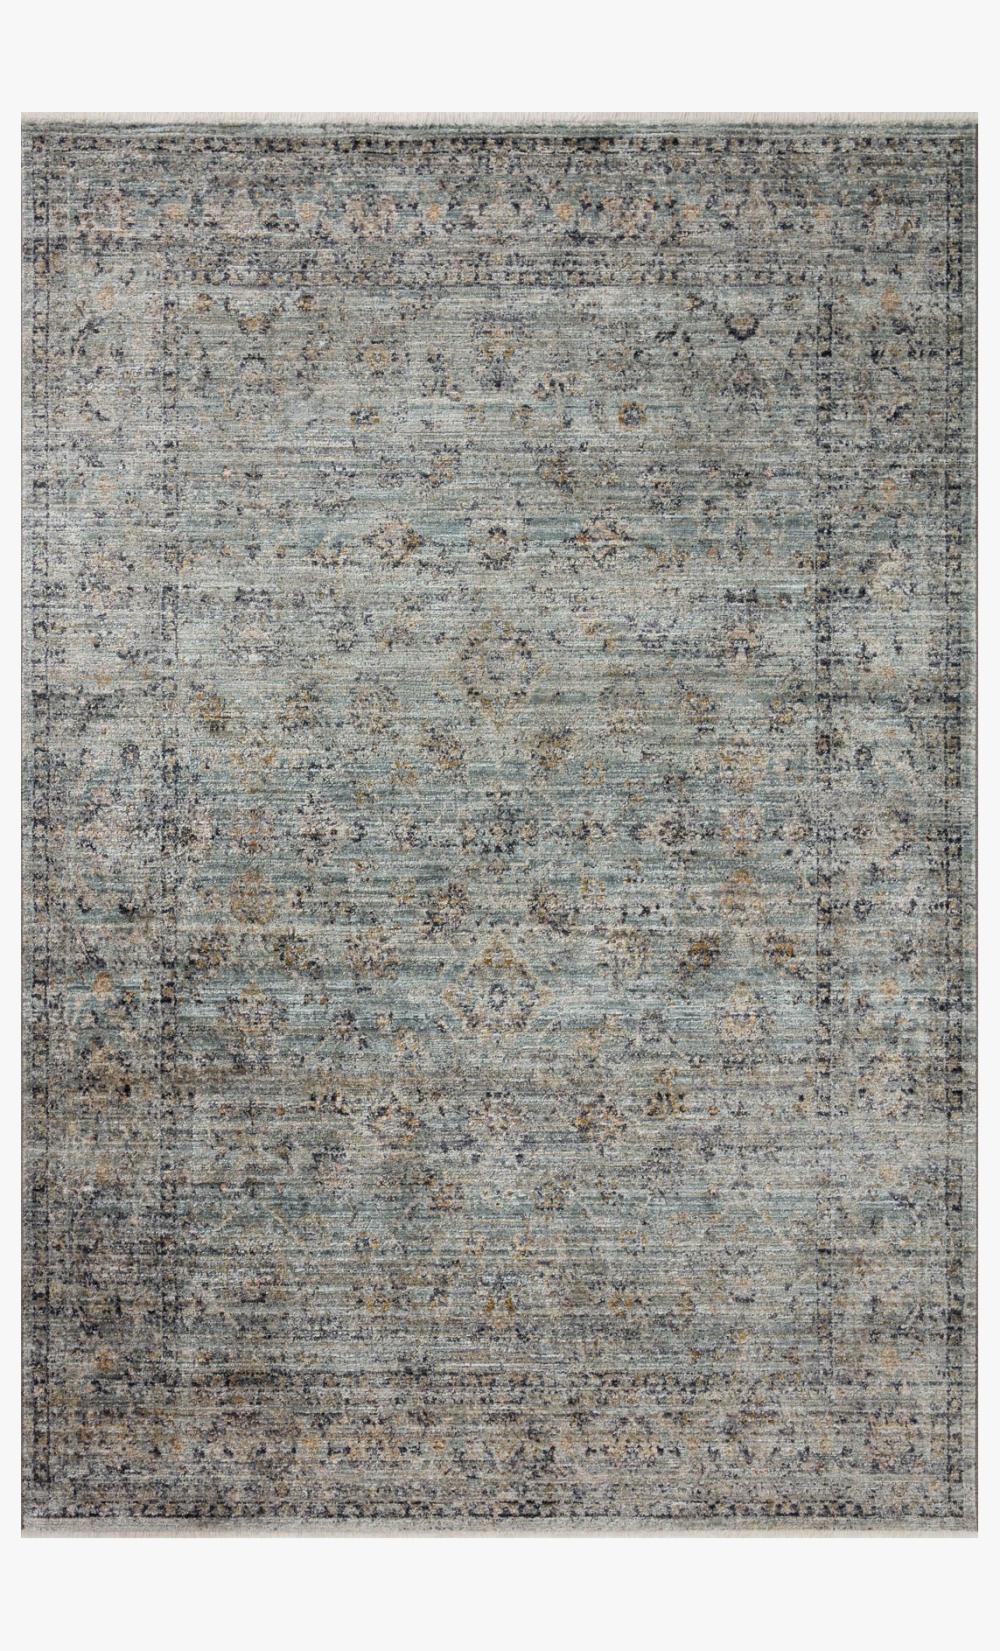 Meticulously power-loomed blue and gold rug with organic dimension, ribbed texture, blending machine craftsmanship with handmade artistry.